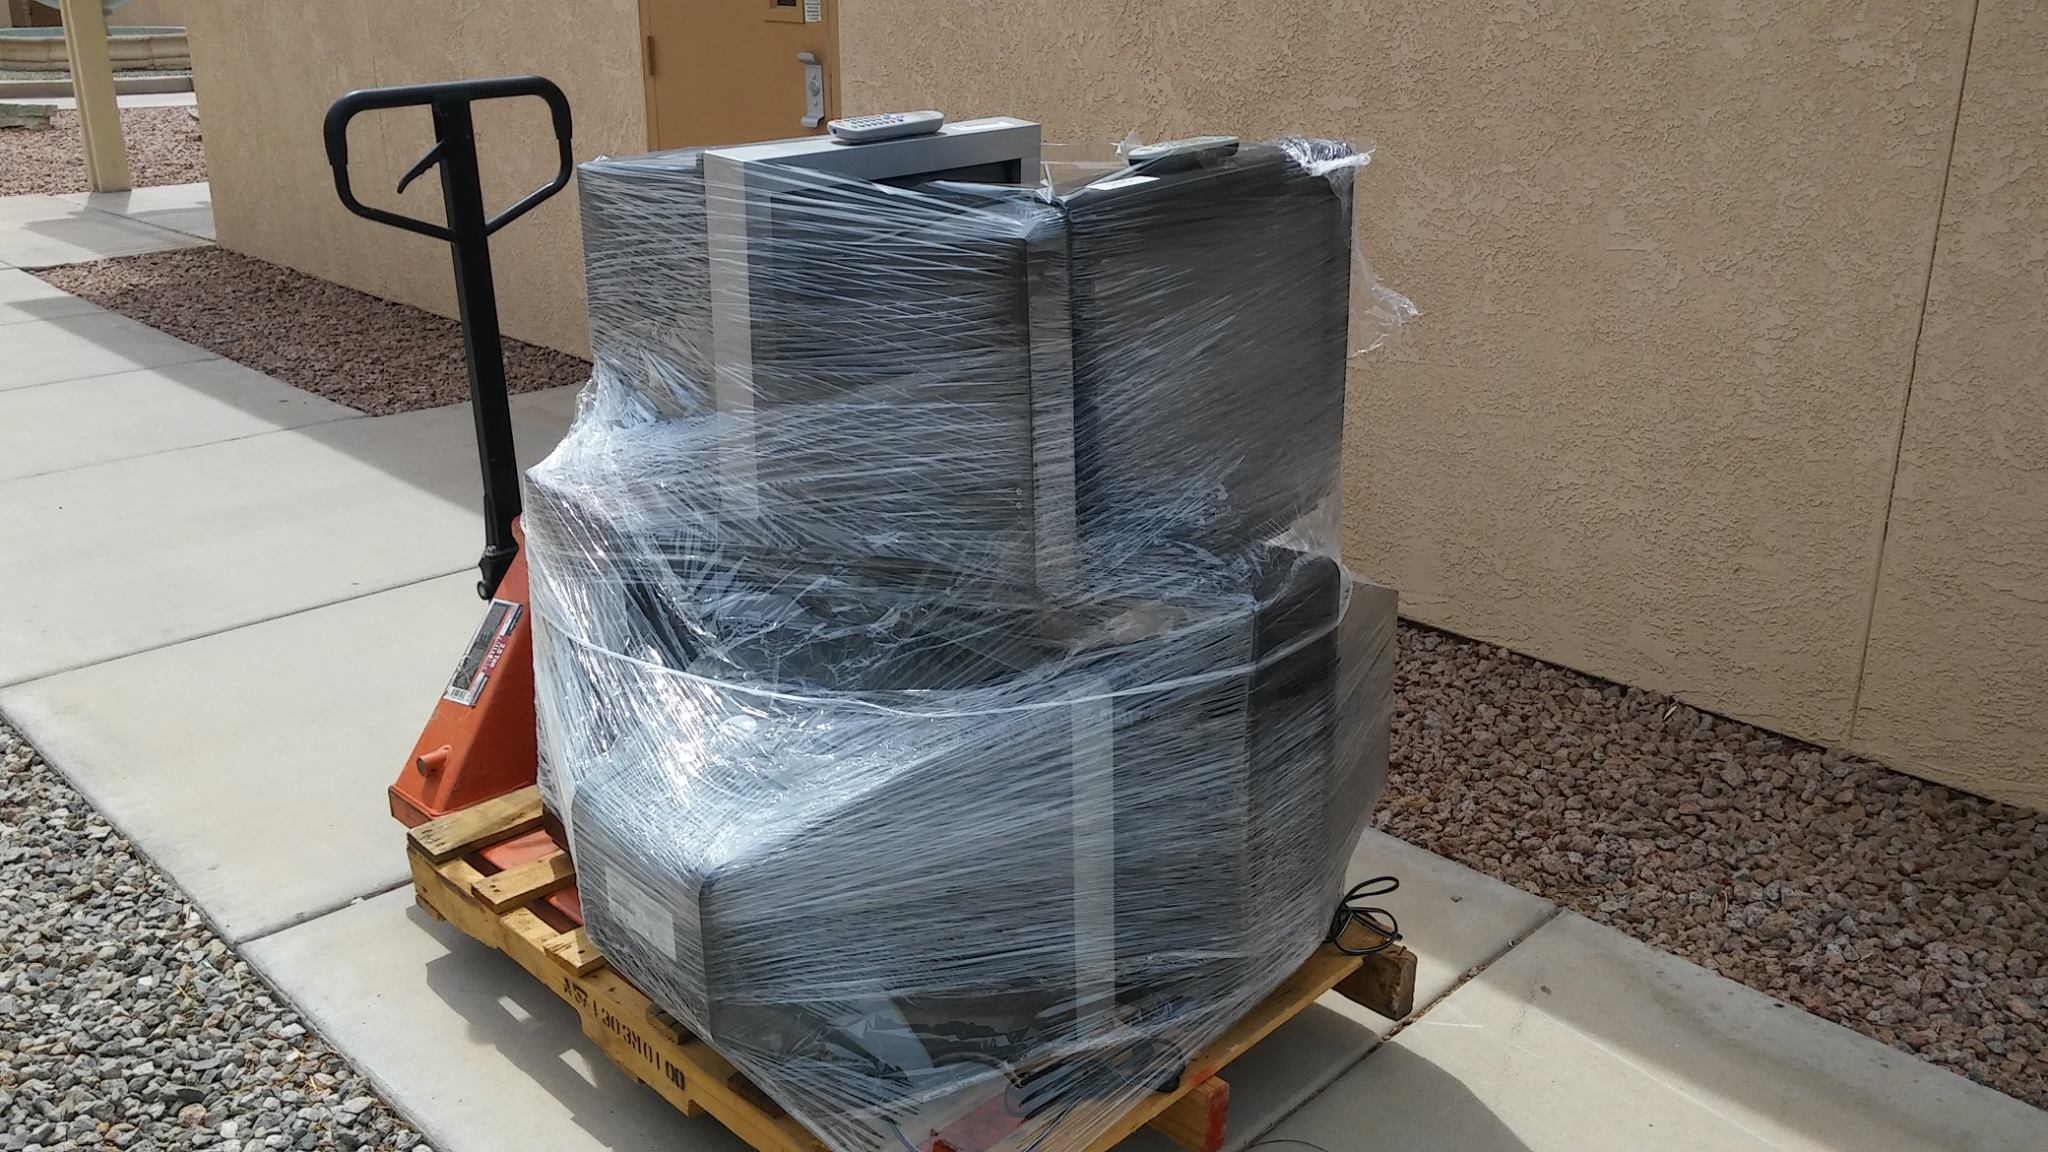 The Last shipment of TV's and DVD players donated to the Hotel San Carlos Apartments going to those in need.